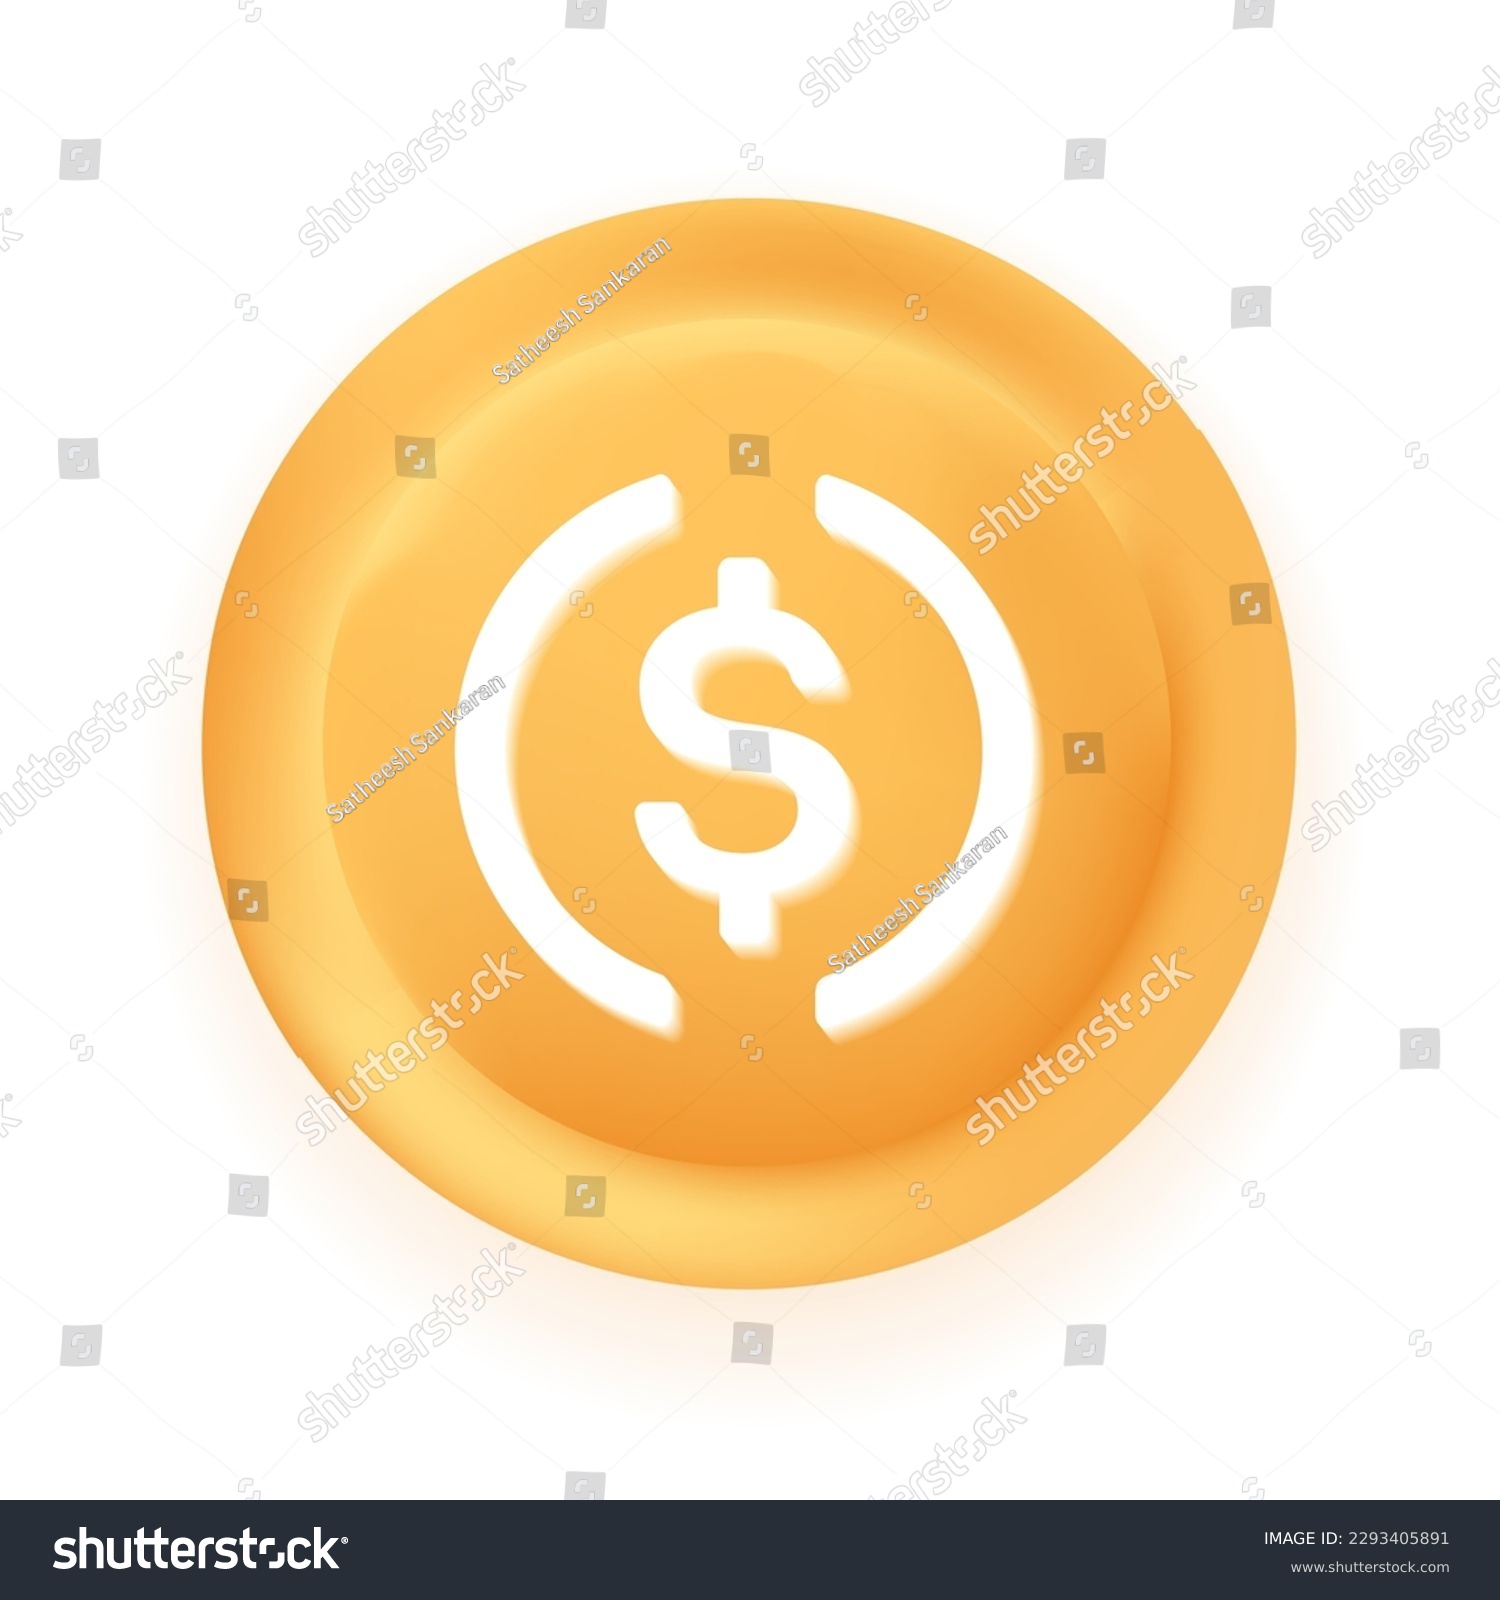 SVG of USD Coin USDC crypto currency 3D coin vector illustration isolated on white background. Can be used as virtual money icon, logo, emblem, sticker and badge designs. svg